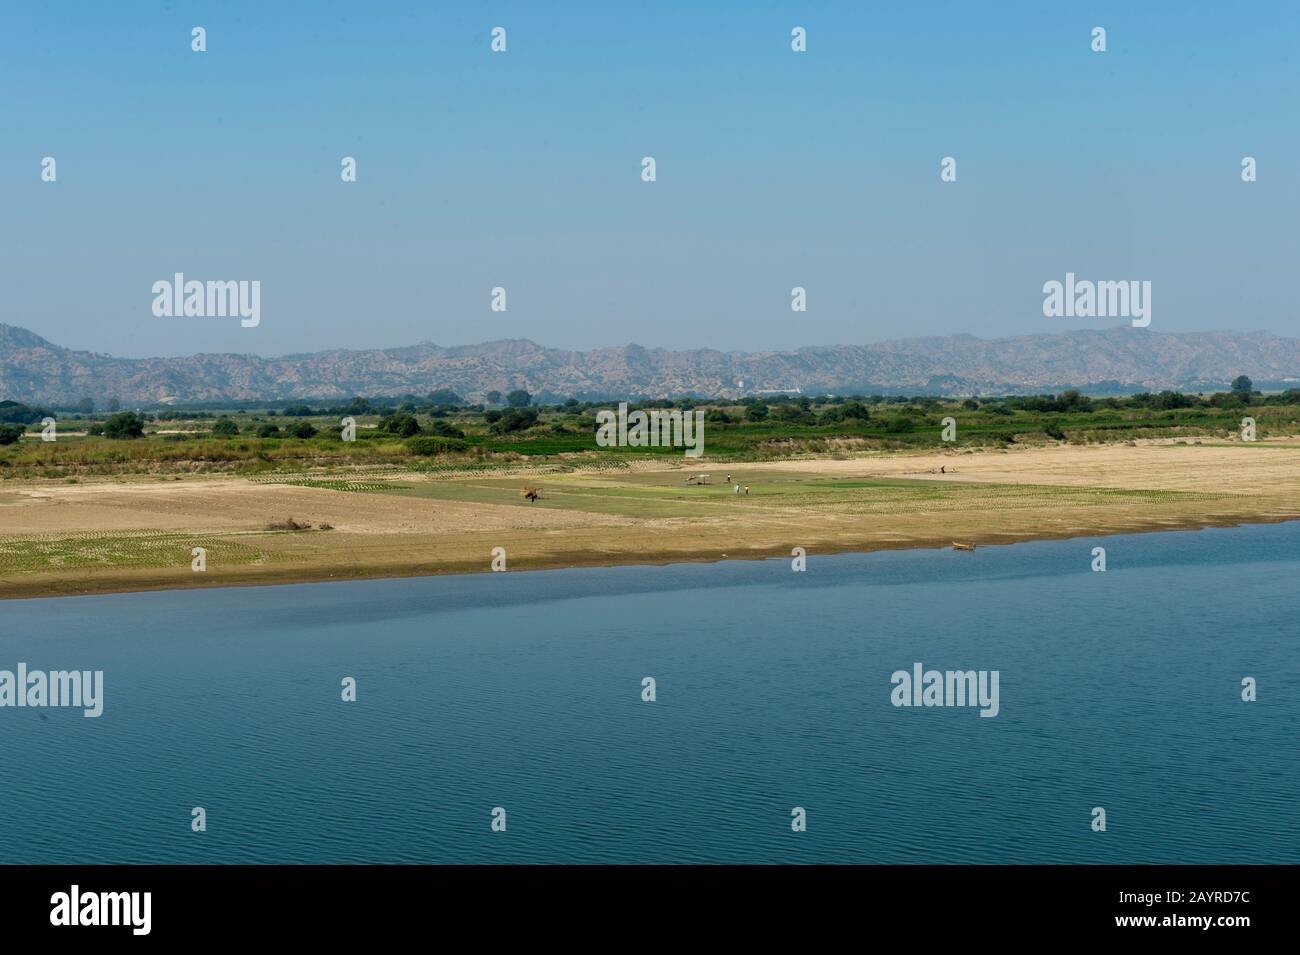 Farmers planted crops on the riverbank after rainy season and the high water of the Irrawaddy River (Ayeyarwady River) receded in Bagan, Myanmar. Stock Photo